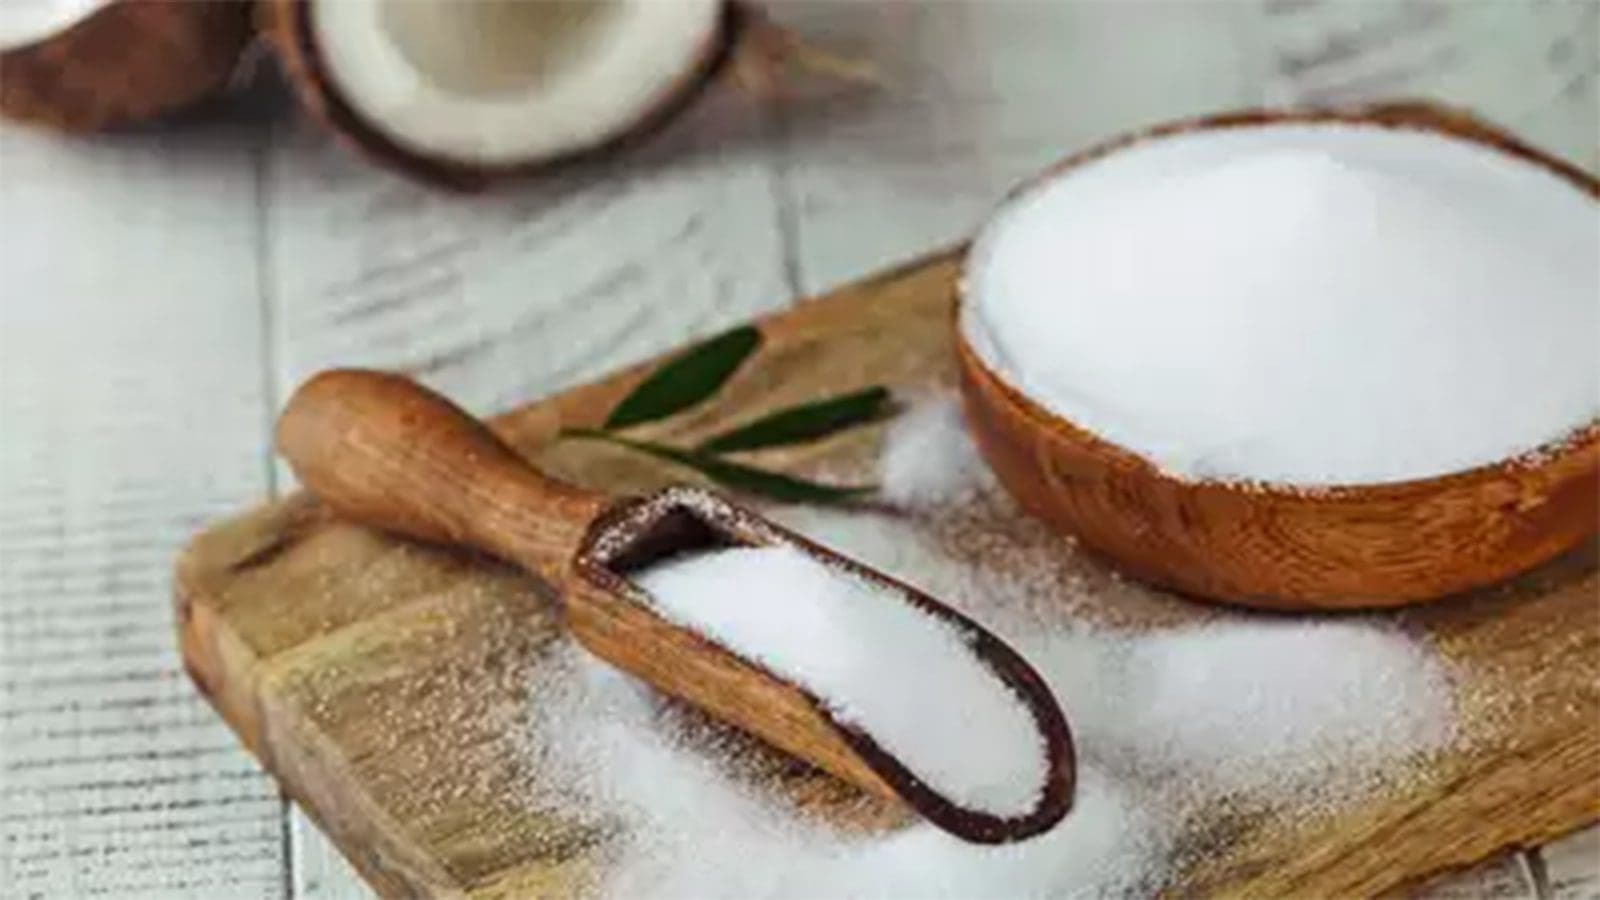 Popular zero-calorie food sweetener erythritol linked to increased risk of heart attack, stroke